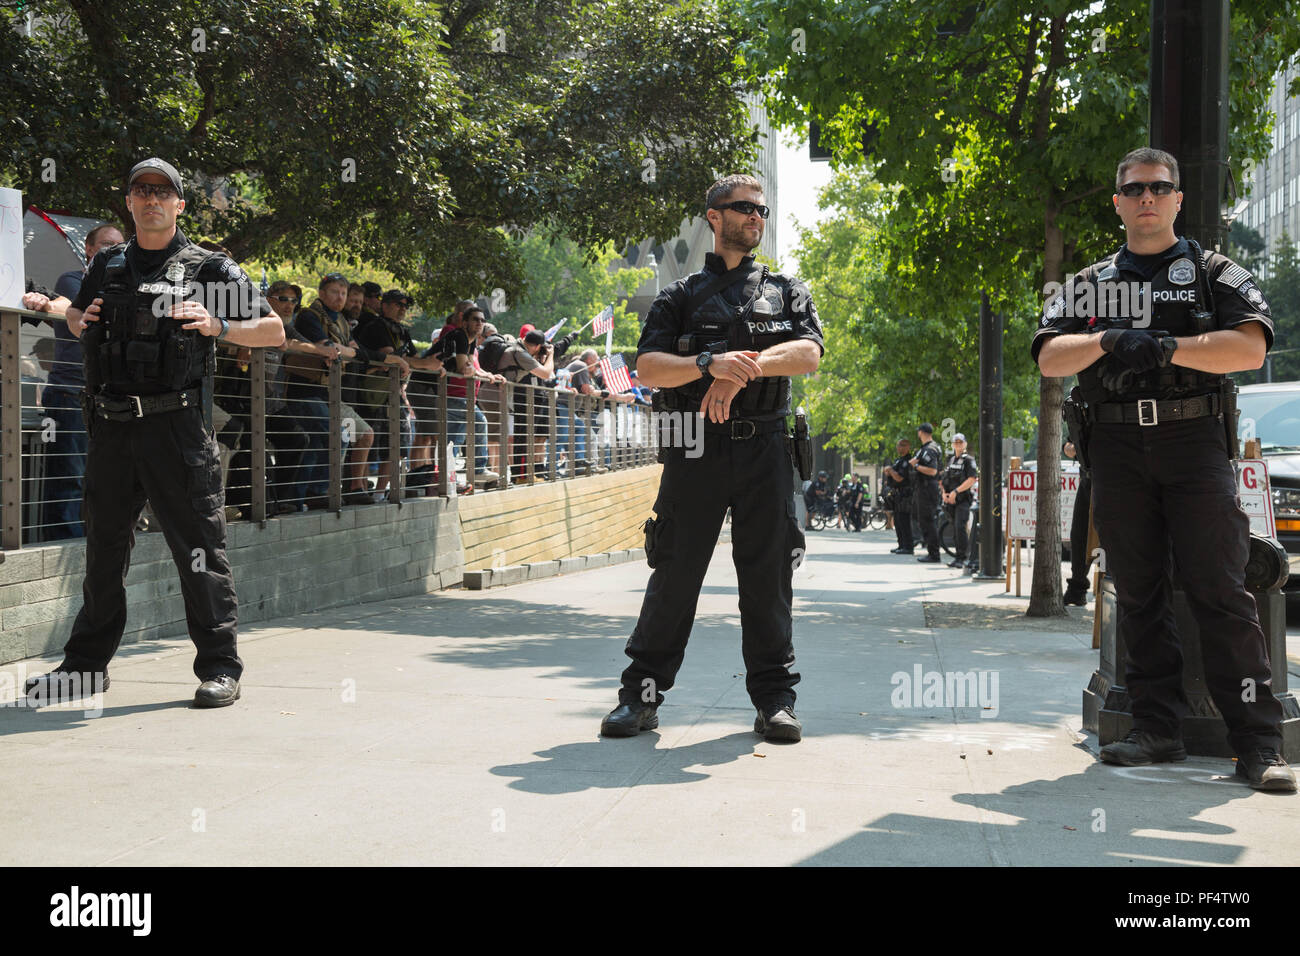 Seattle, WA, USA.  18th August, 2018.  The site of the pro gun rally with the police officers blocks the sidewalk in front of the City Hall Plaza.  Credit: Maria S./Alamy Live News. Stock Photo